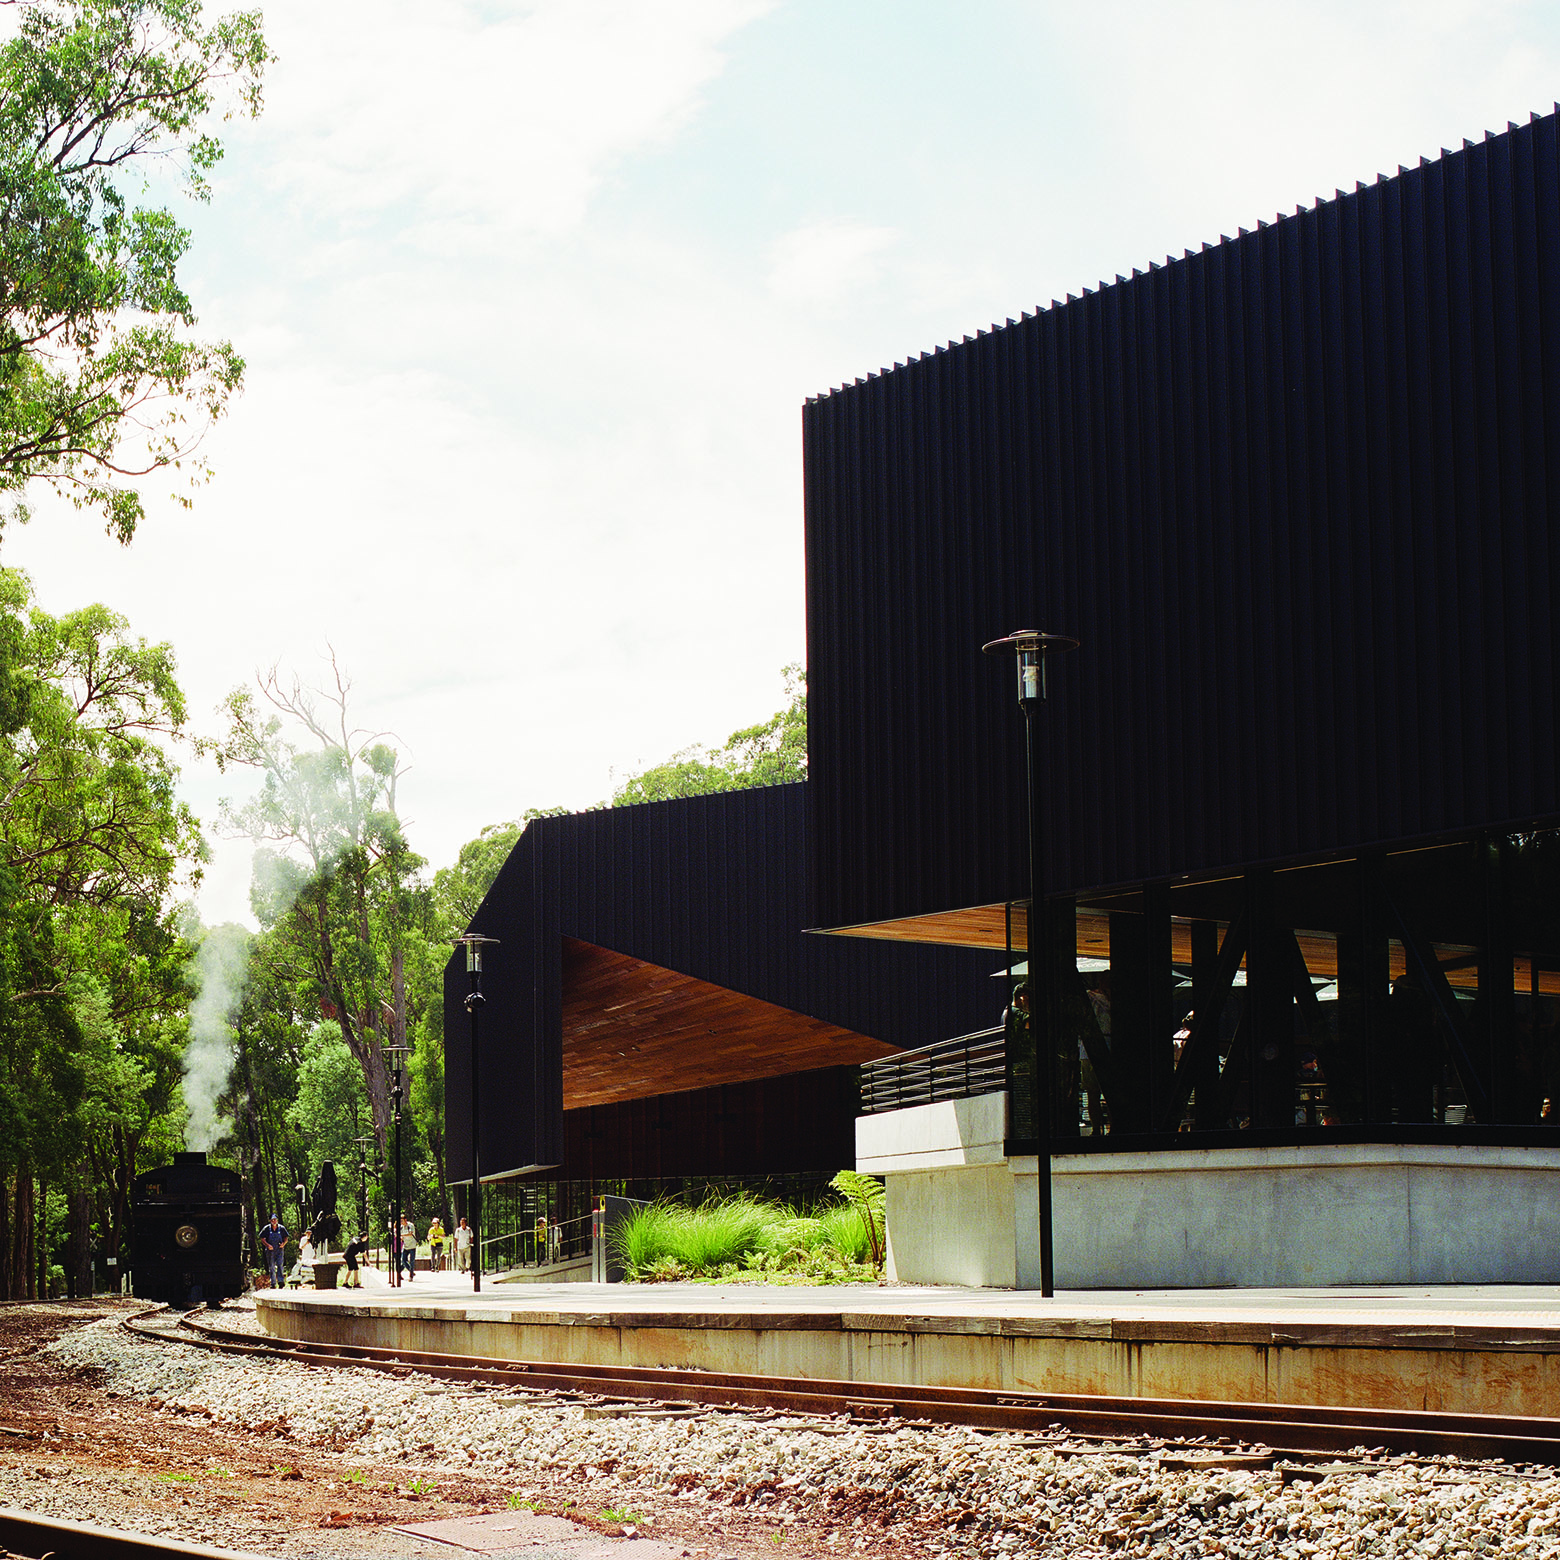 Featured image of Puffing Billy Lakeside Visitor Centre